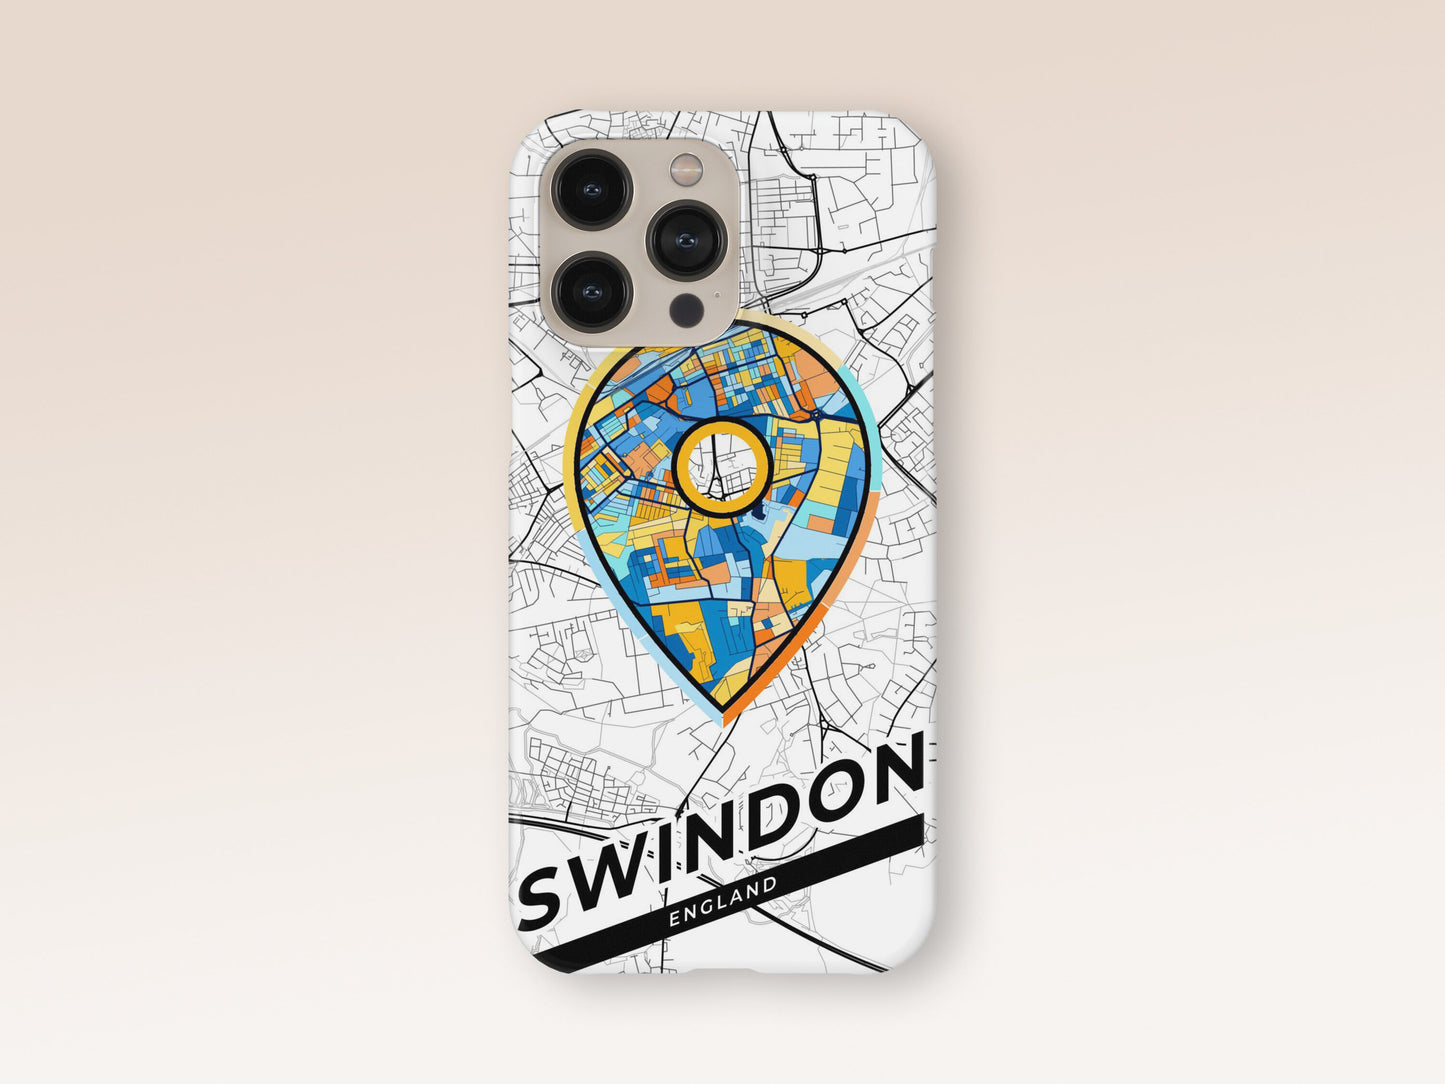 Swindon England slim phone case with colorful icon 1